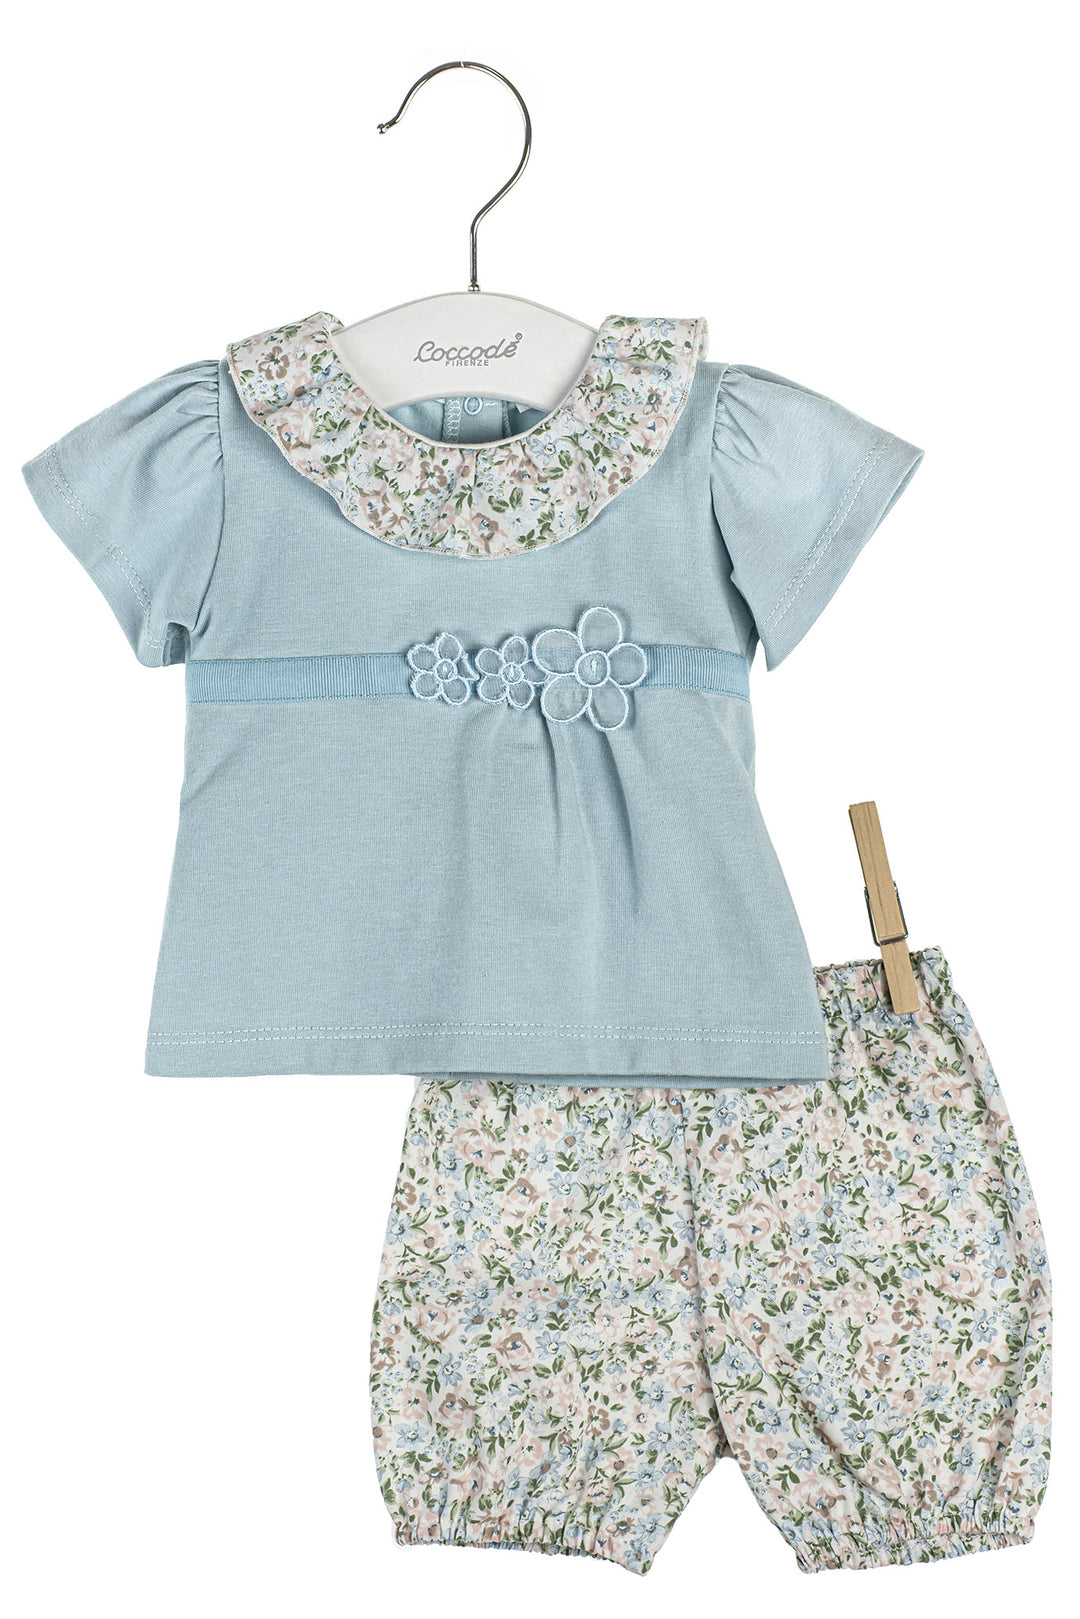 Coccodè "Frieda" Powder Blue Floral Top & Bloomers | Millie and John